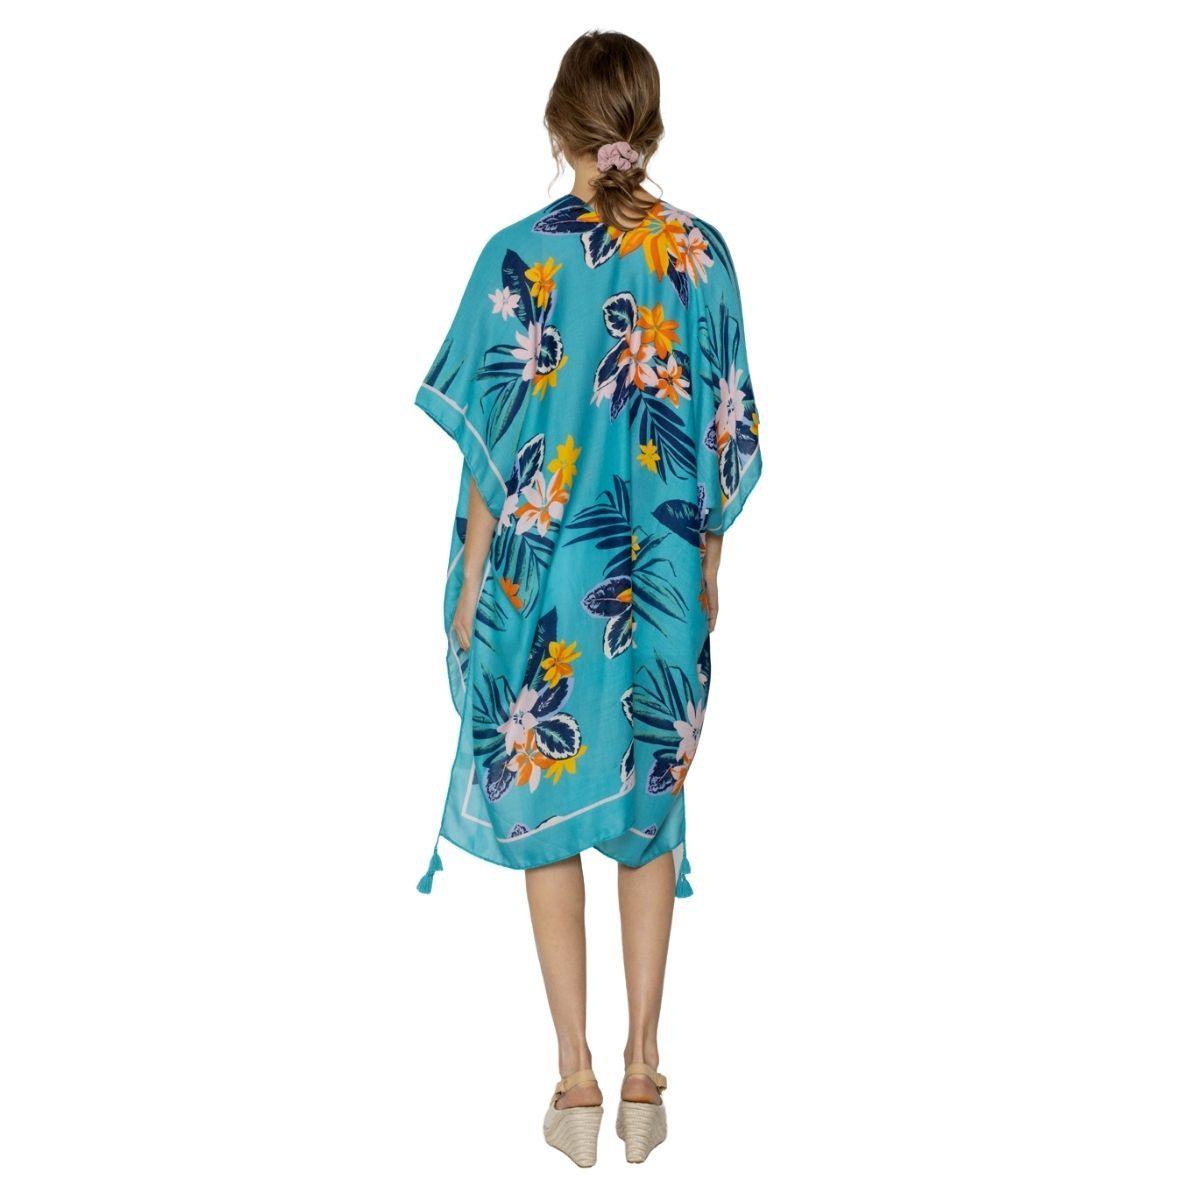 Get Your Summer Look with Turquoise Floral Kimono Top